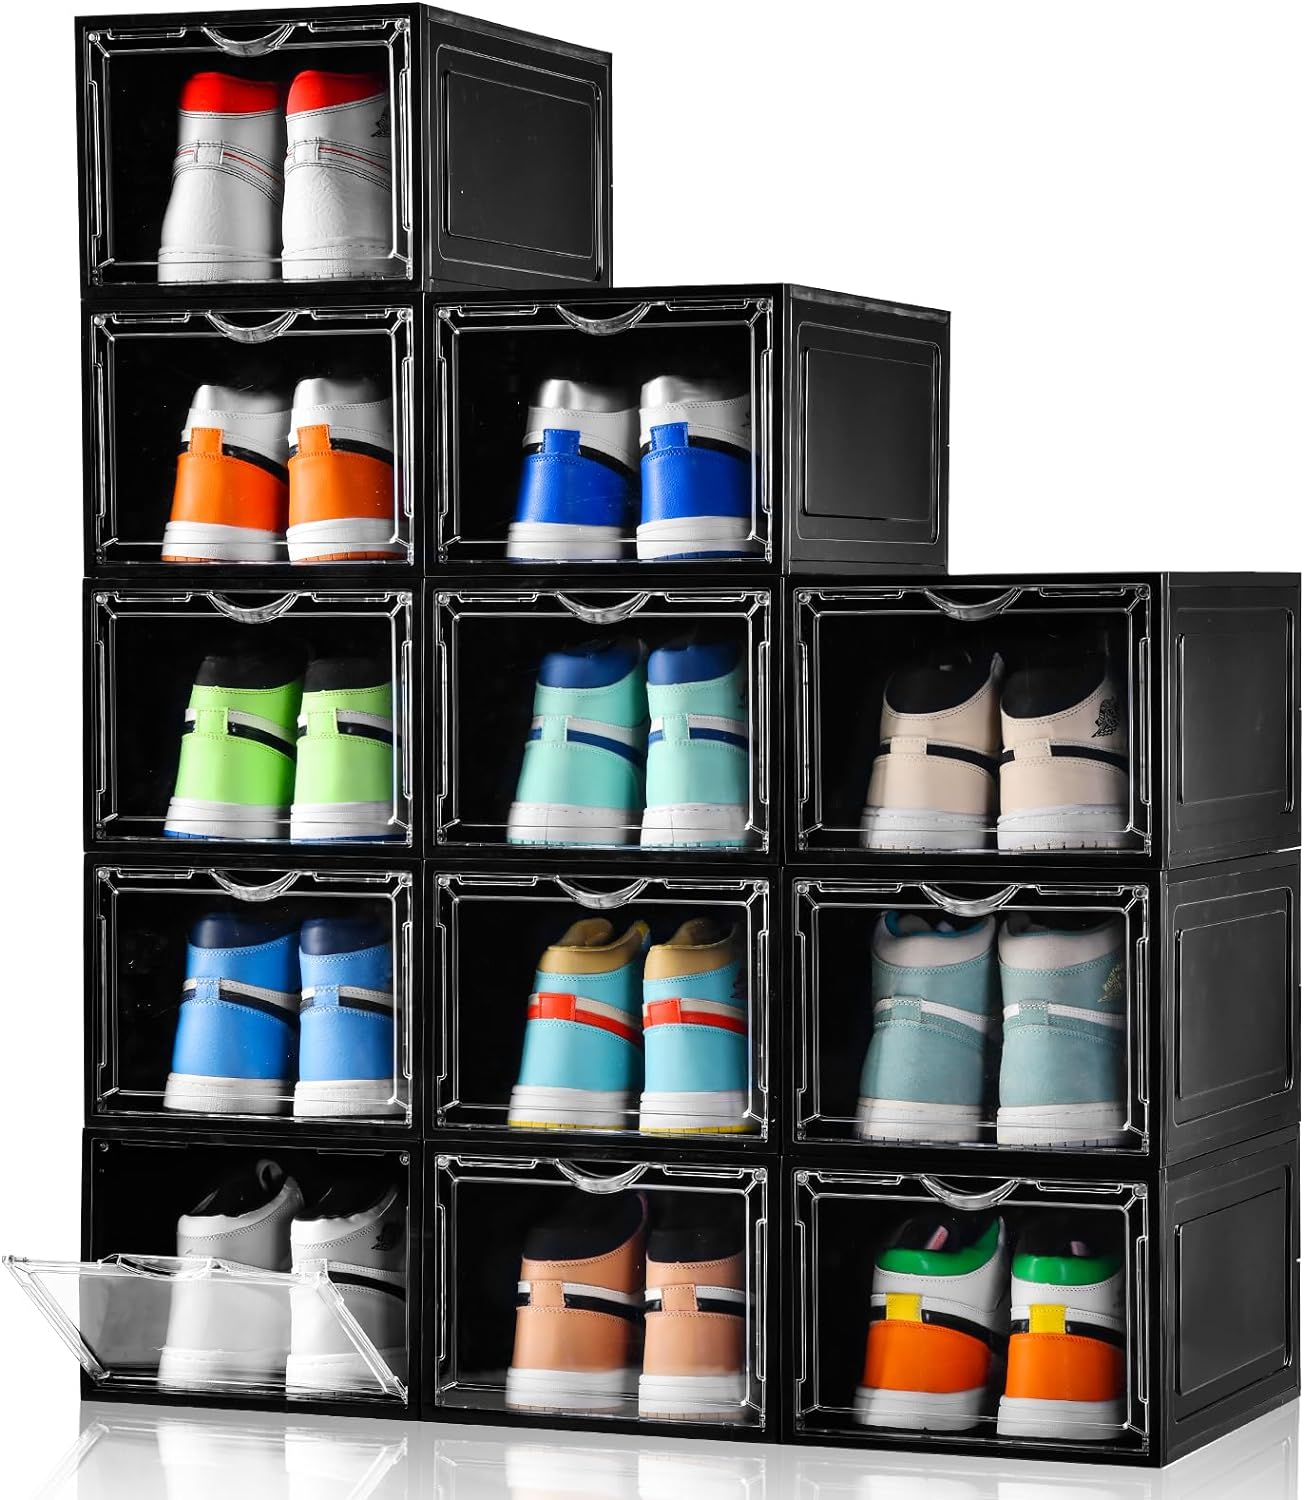 These shoe boxes are the best thing ever! Easy to snap together, sturdy, clear, stackable boxes with magnetic doors. My husband has so many pairs of running shoes and these boxes allow us to store them neatly in the garage!